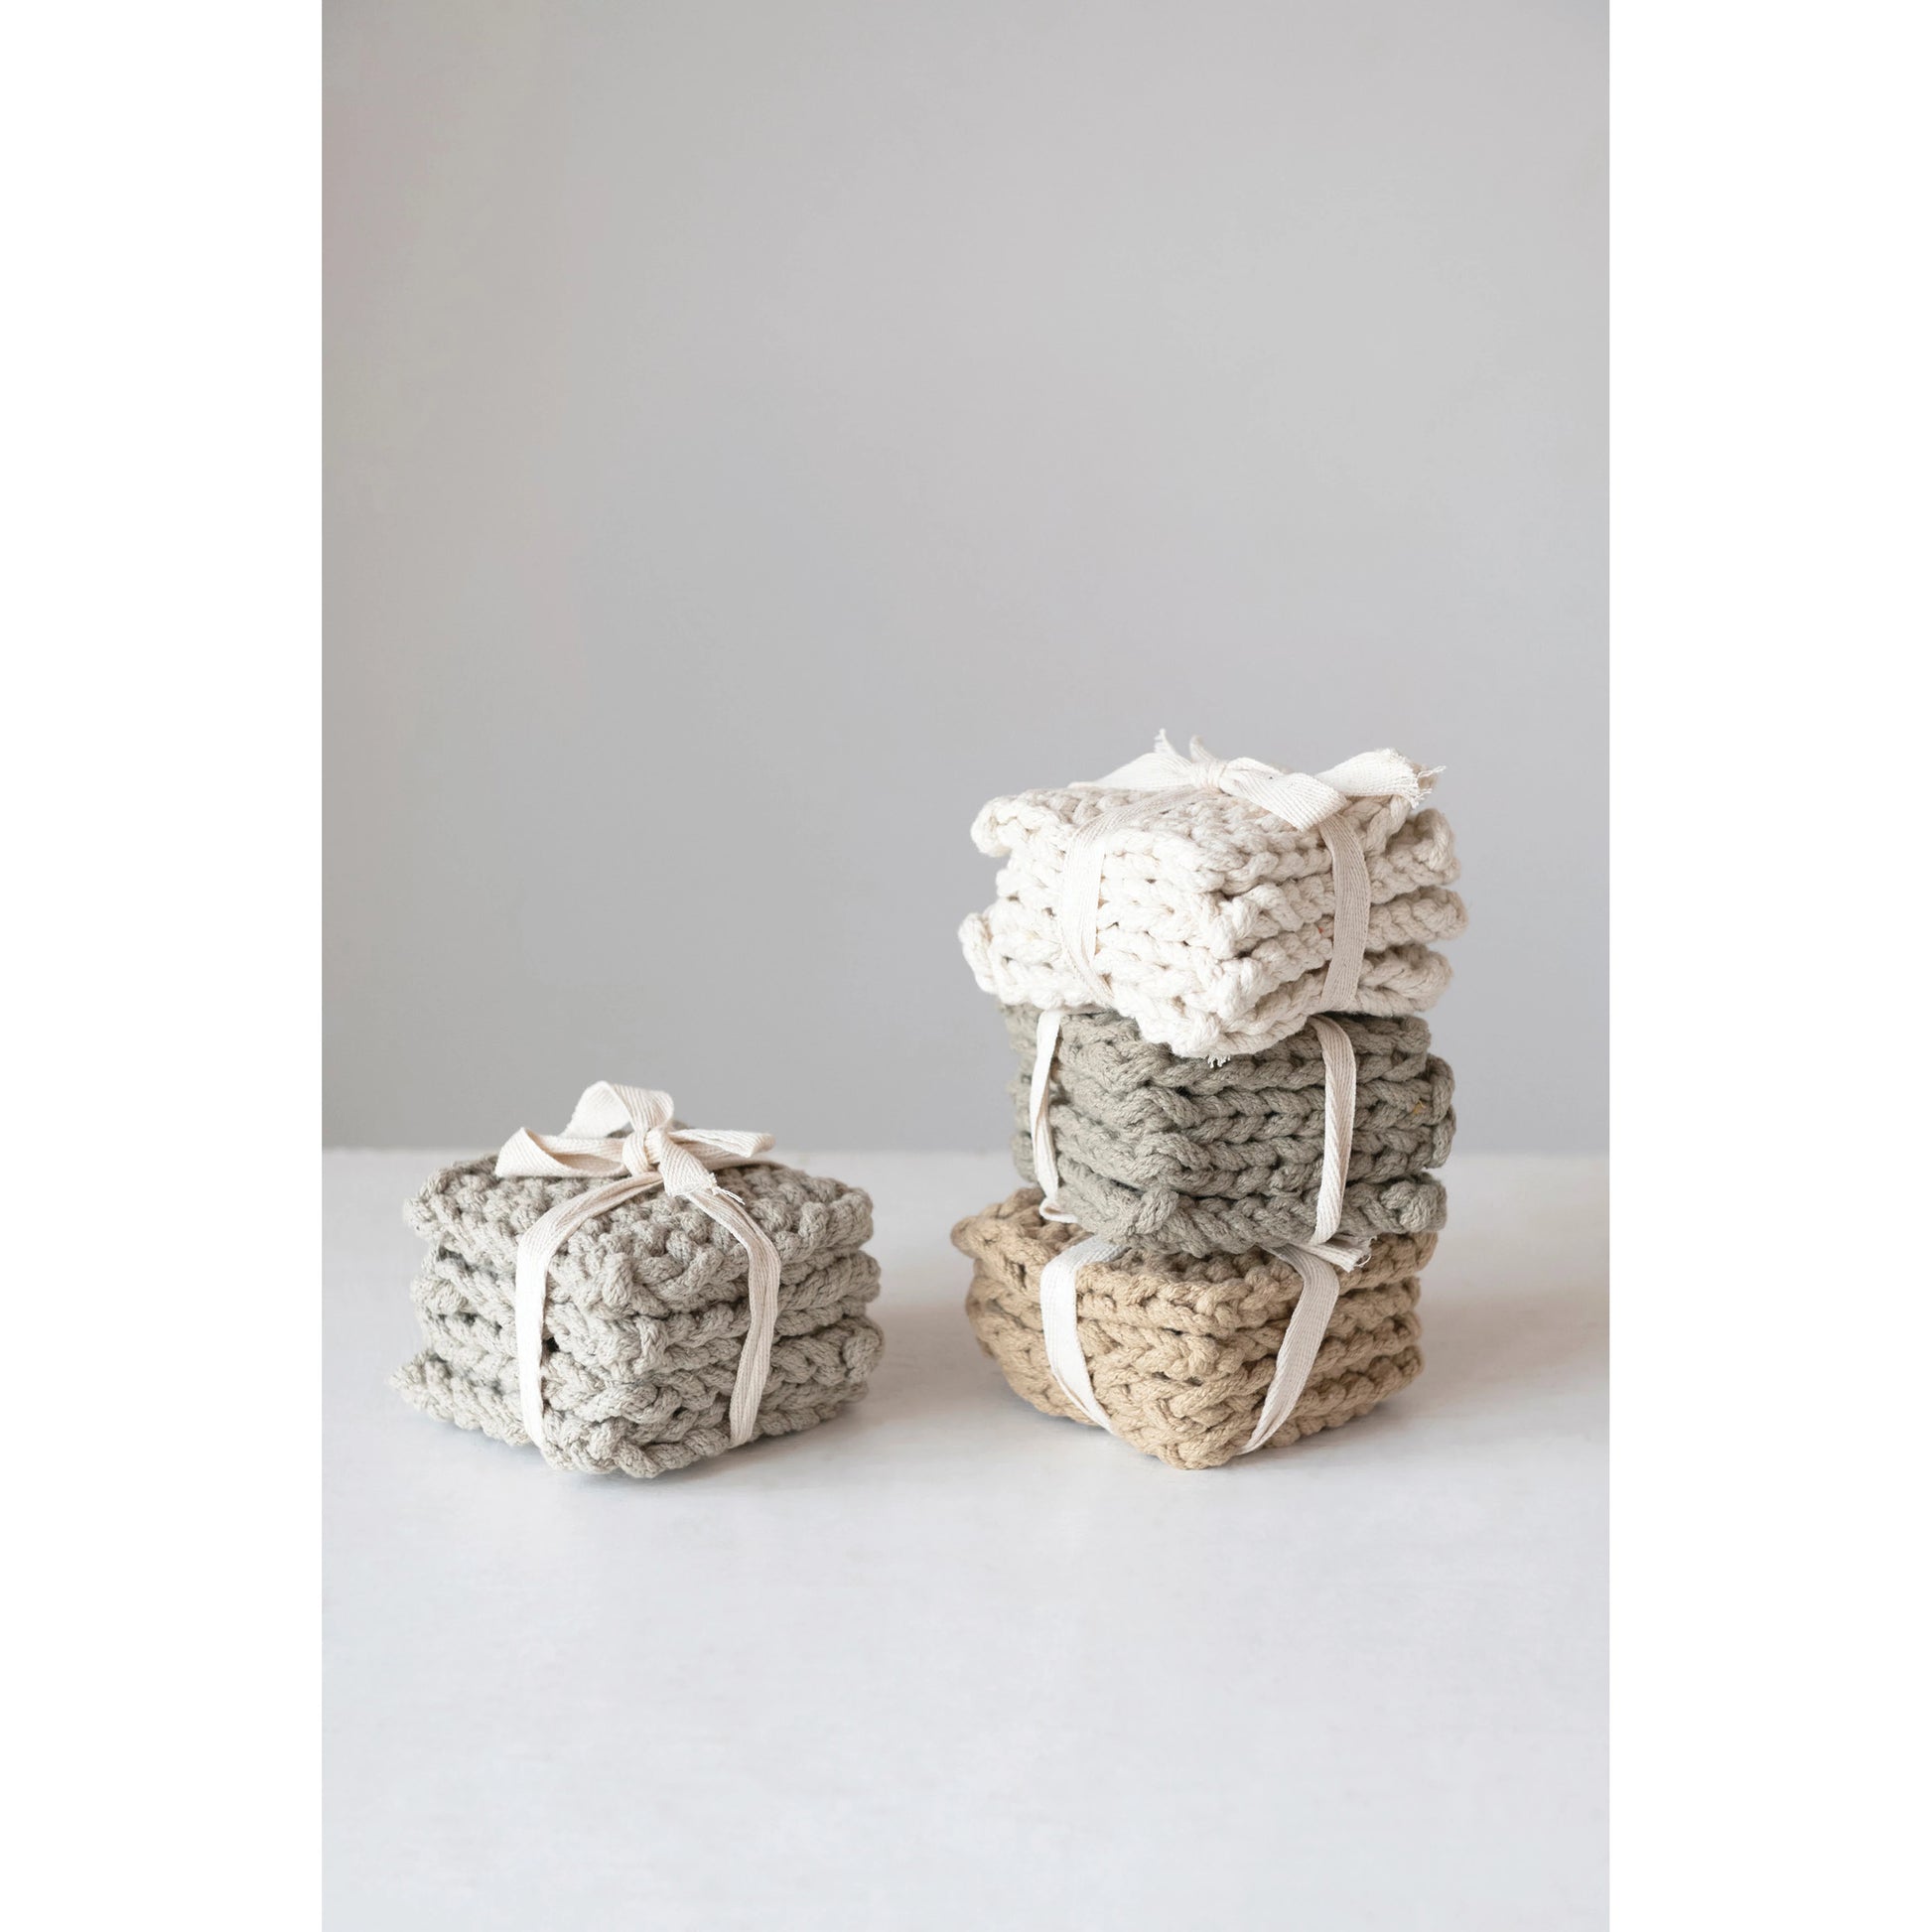 four different colored cotton crocheted coasters stacked on a white table against a light gray background